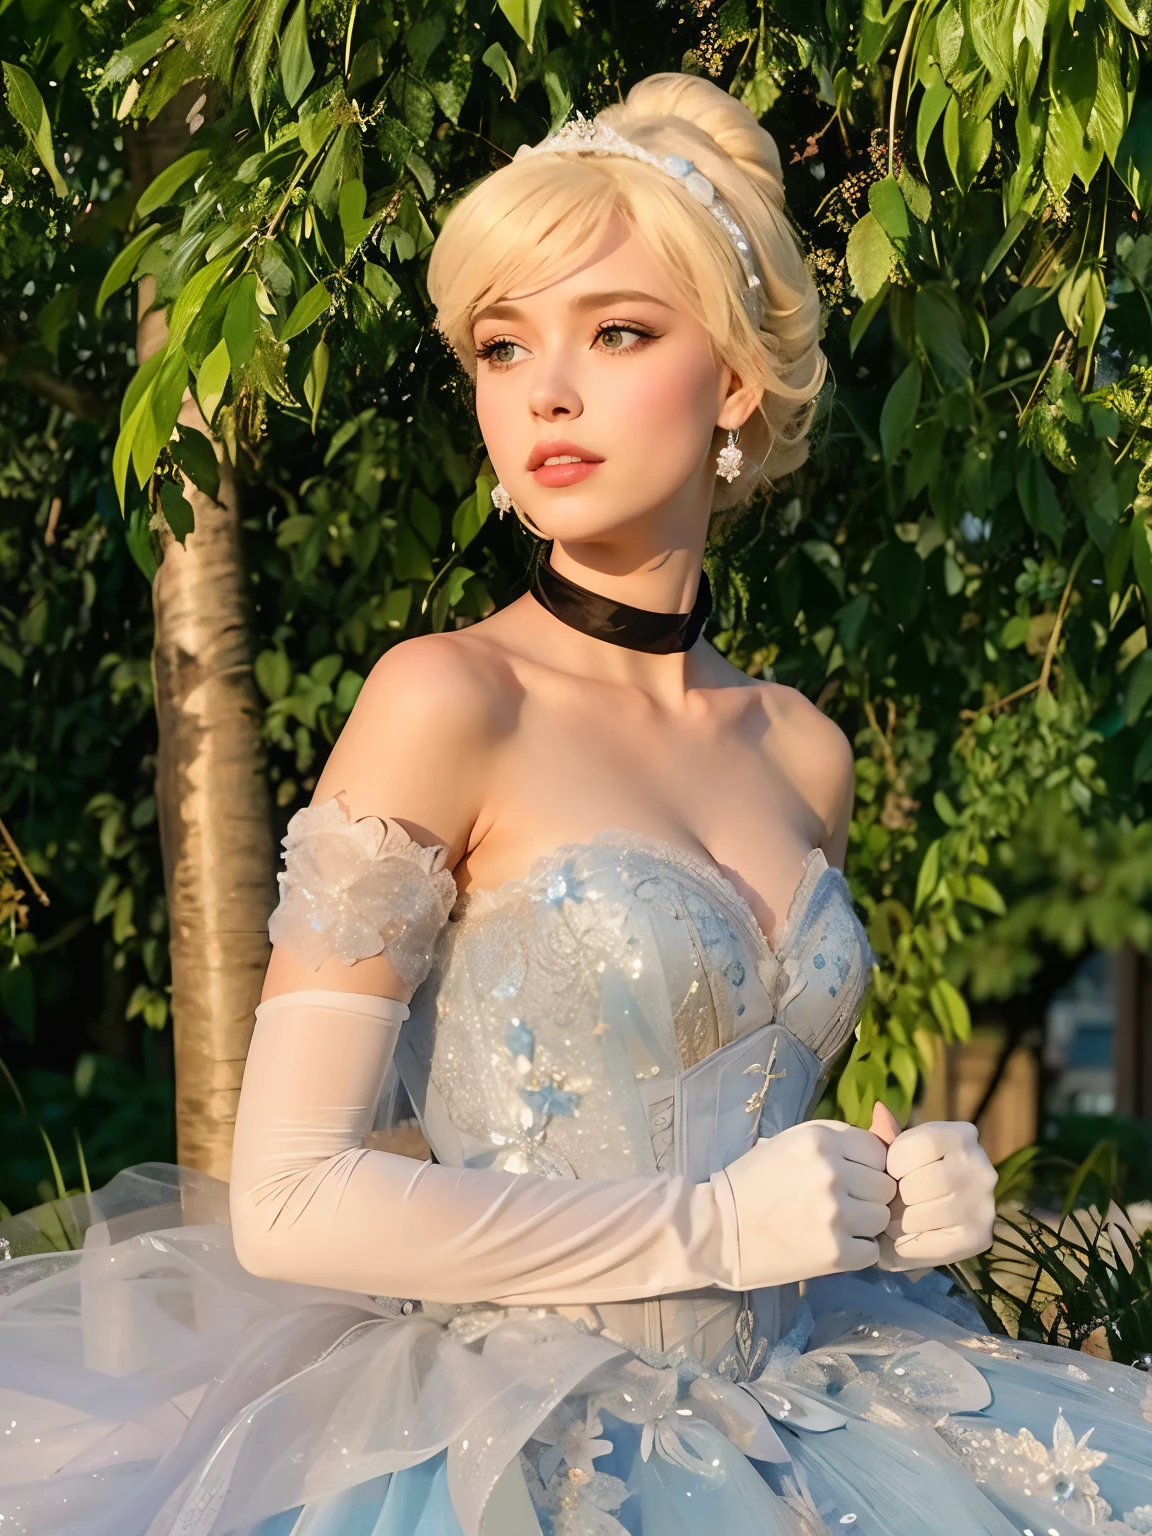 araffe dressed in a blue dress and white gloves posing for a picture, elegant glamourous , cinderella, blonde - haired princess, glamouroueautiful princess, disney inspired, beautiful female princess, inspired by disney, detailed dress and face, disney character style, princess in foreground, beautiful elsa, elegant and graceful, in costume